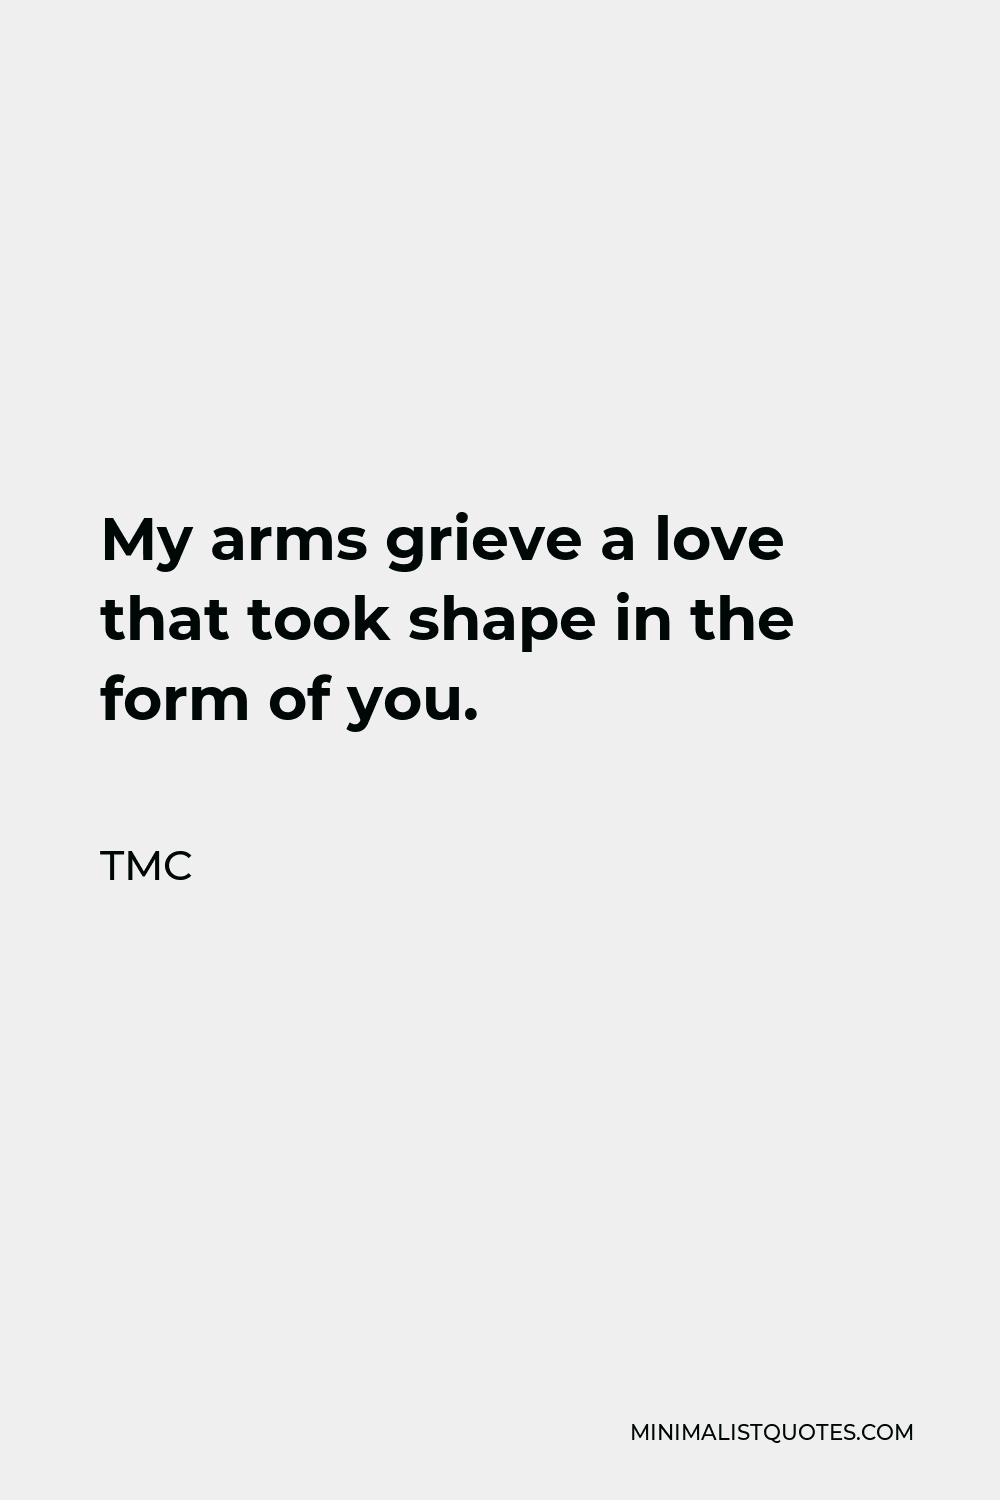 TMC Quote - My arms grieve a love that took shape in the form of you.